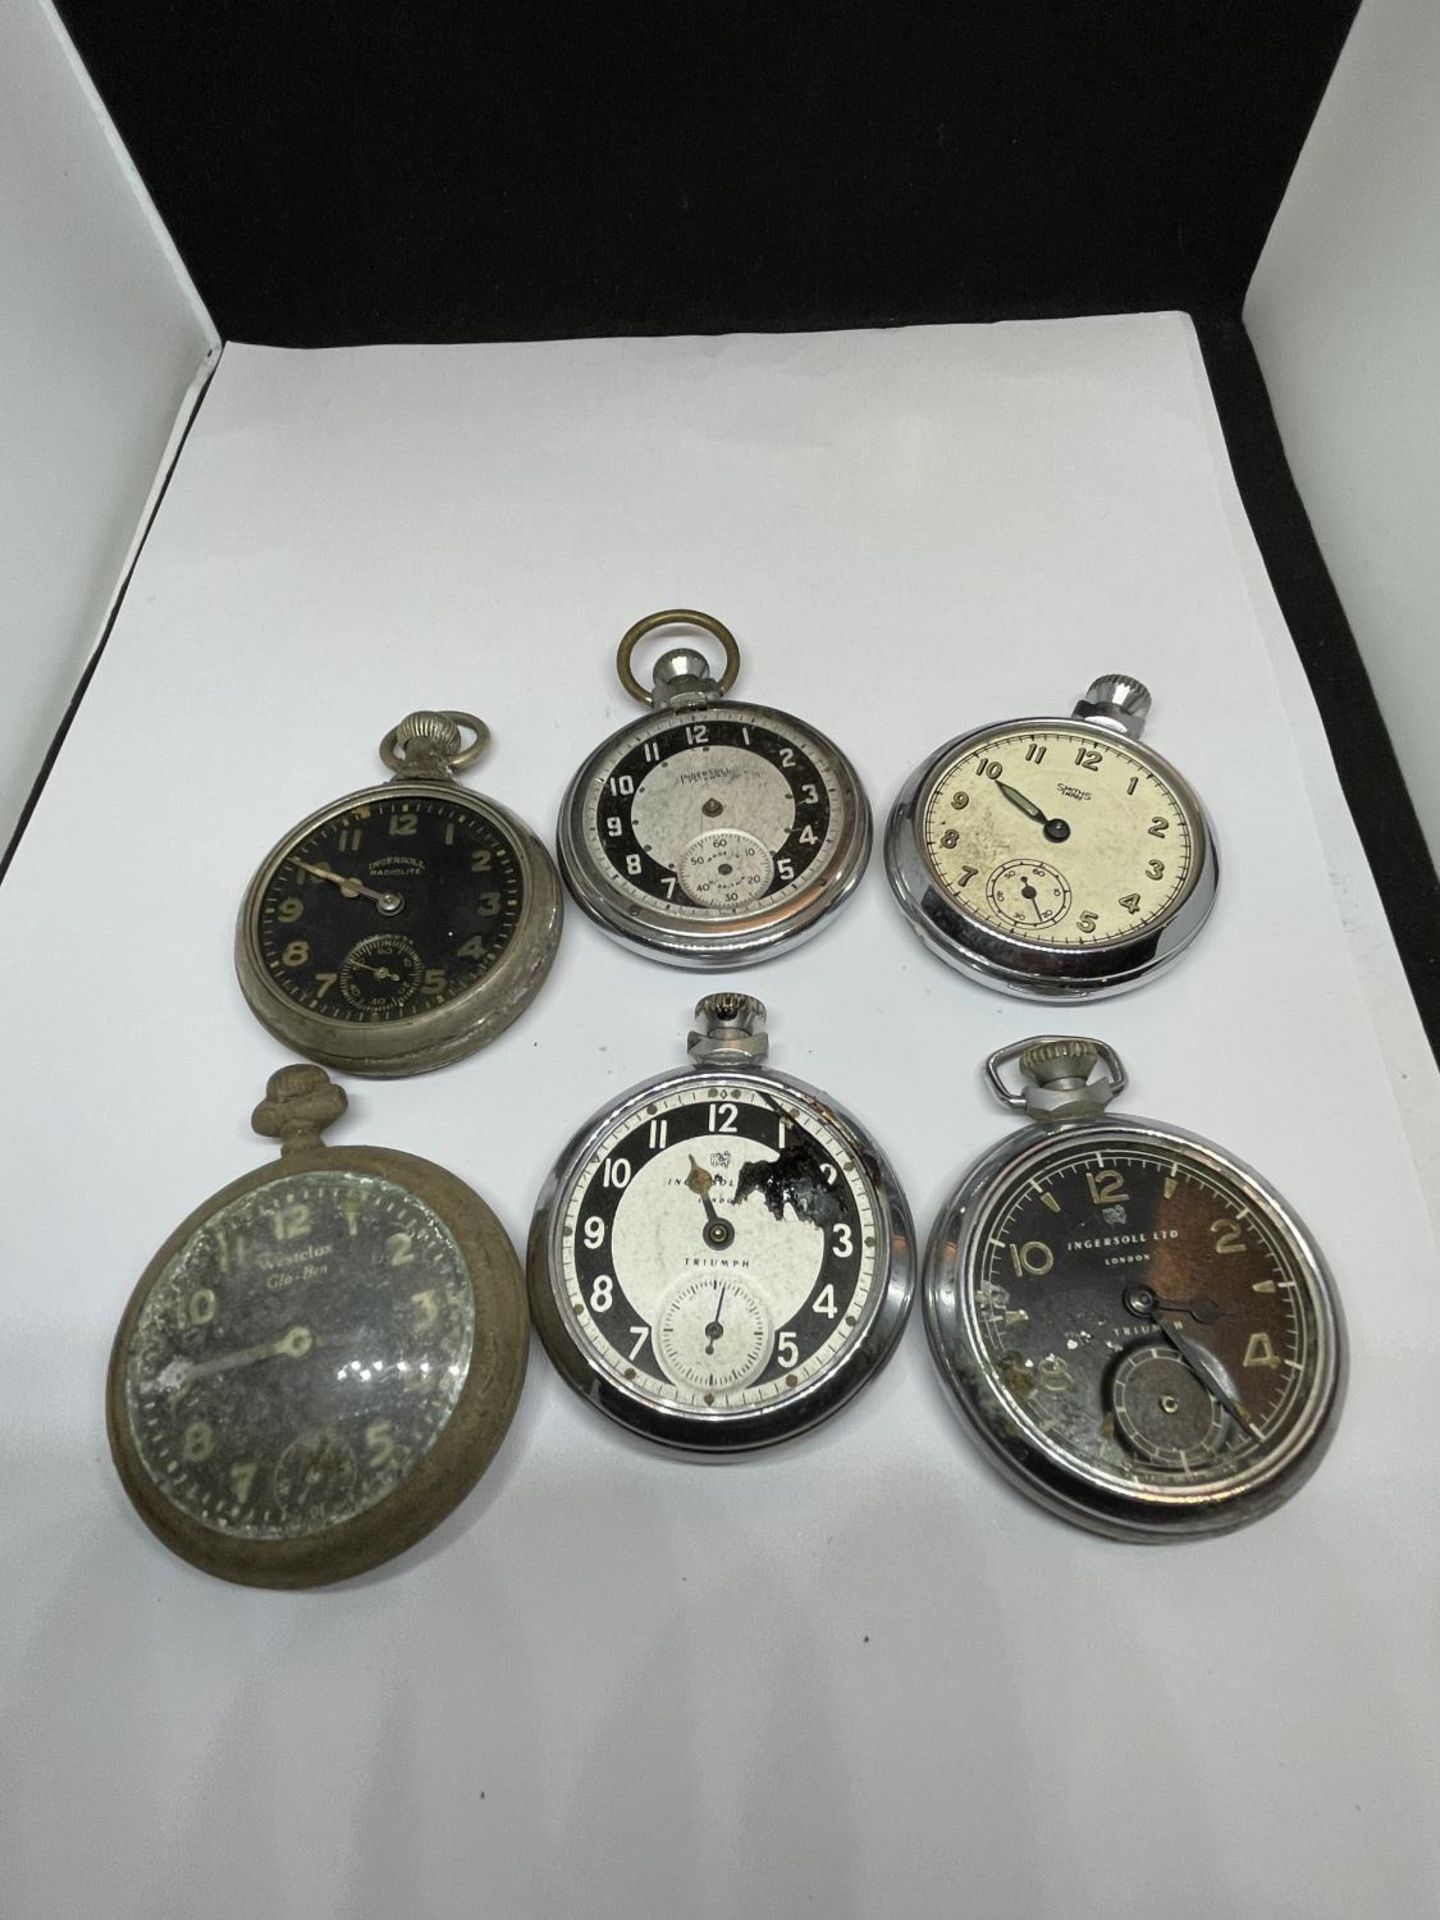 SIX VARIOUS POCKET WATCHES FOR SPARE OR REPAIR - Image 2 of 9